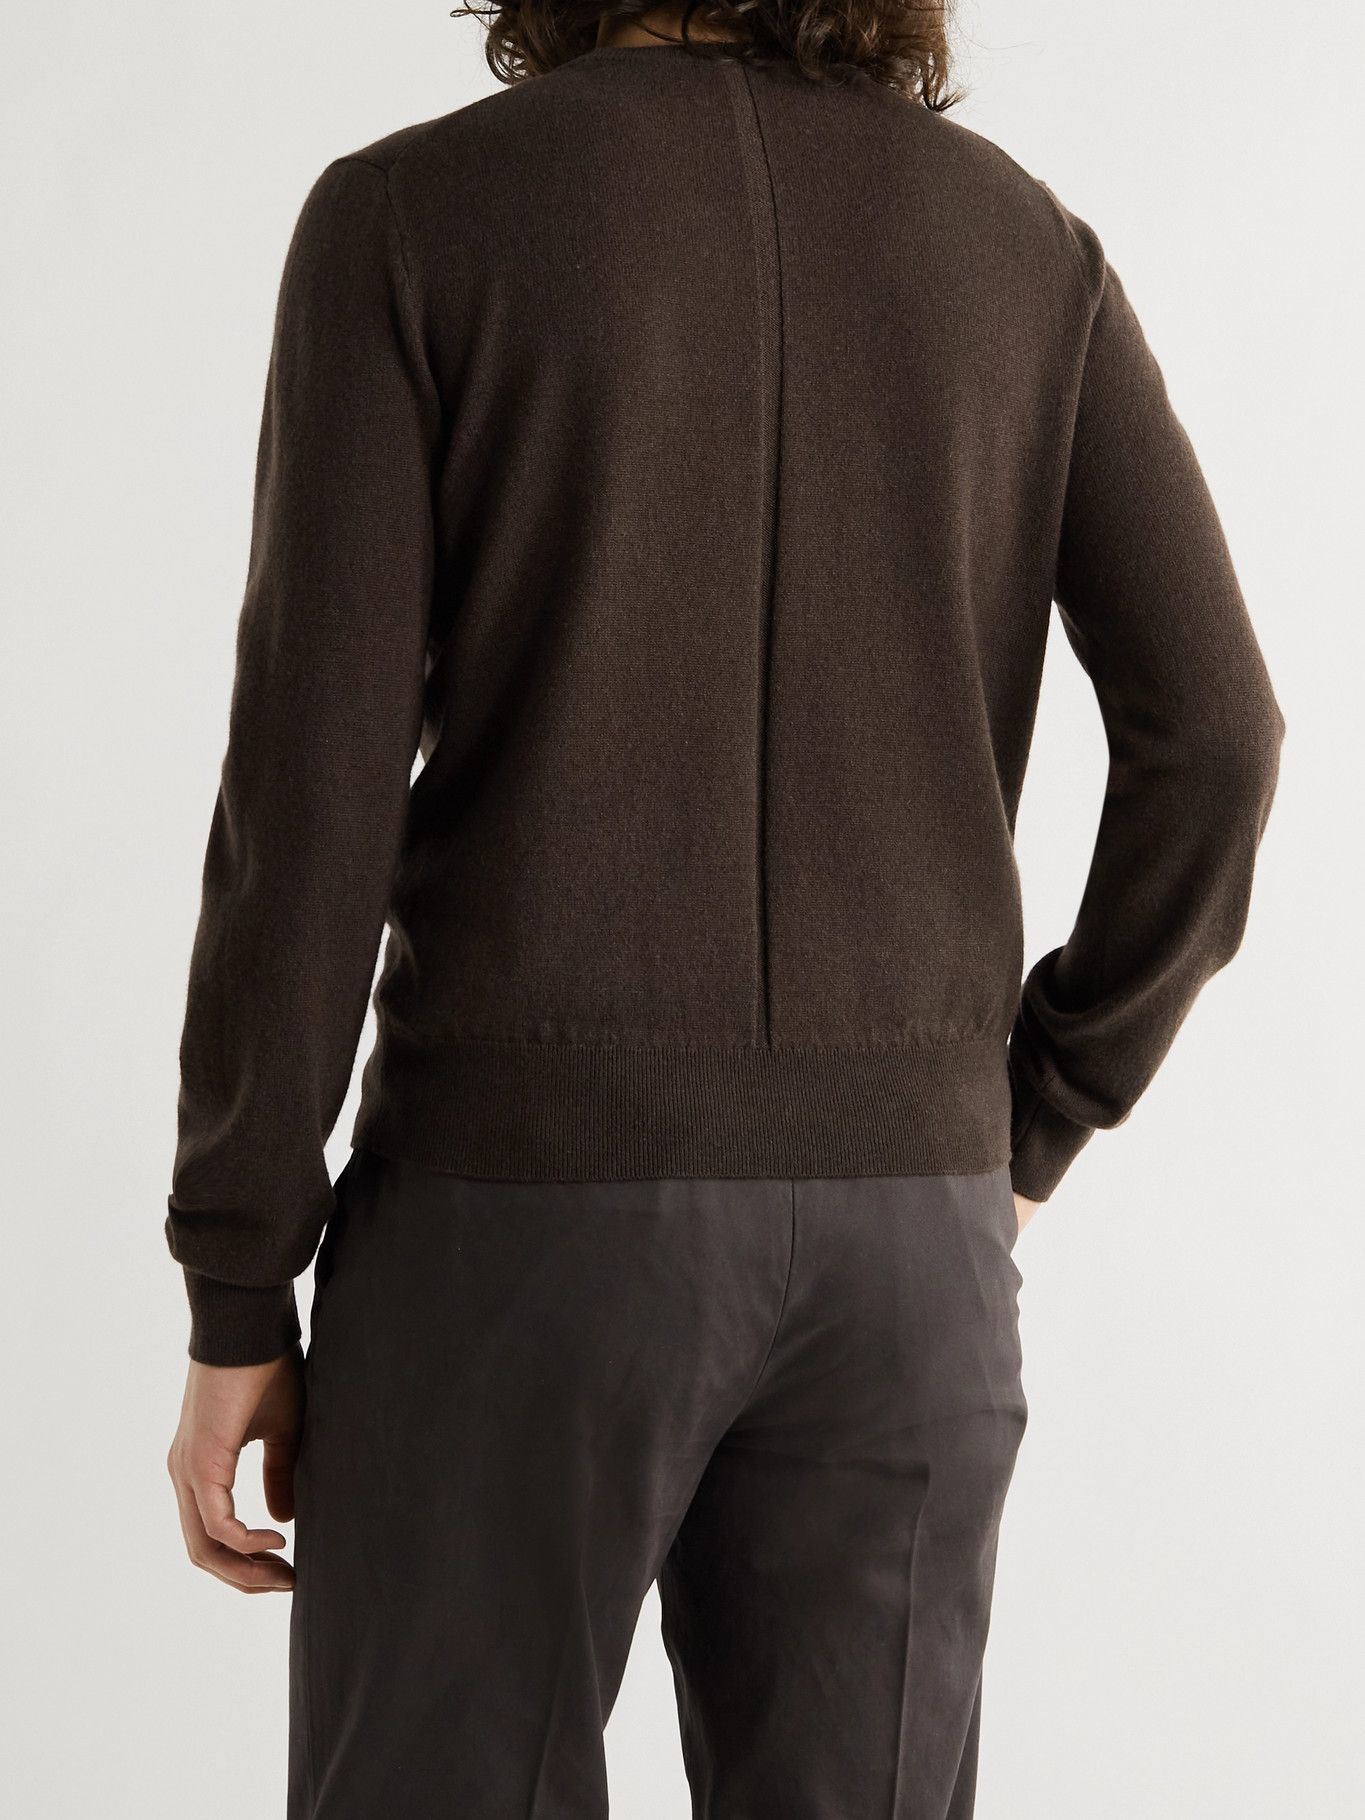 THE ROW - Benji Cashmere Sweater - Brown The Row